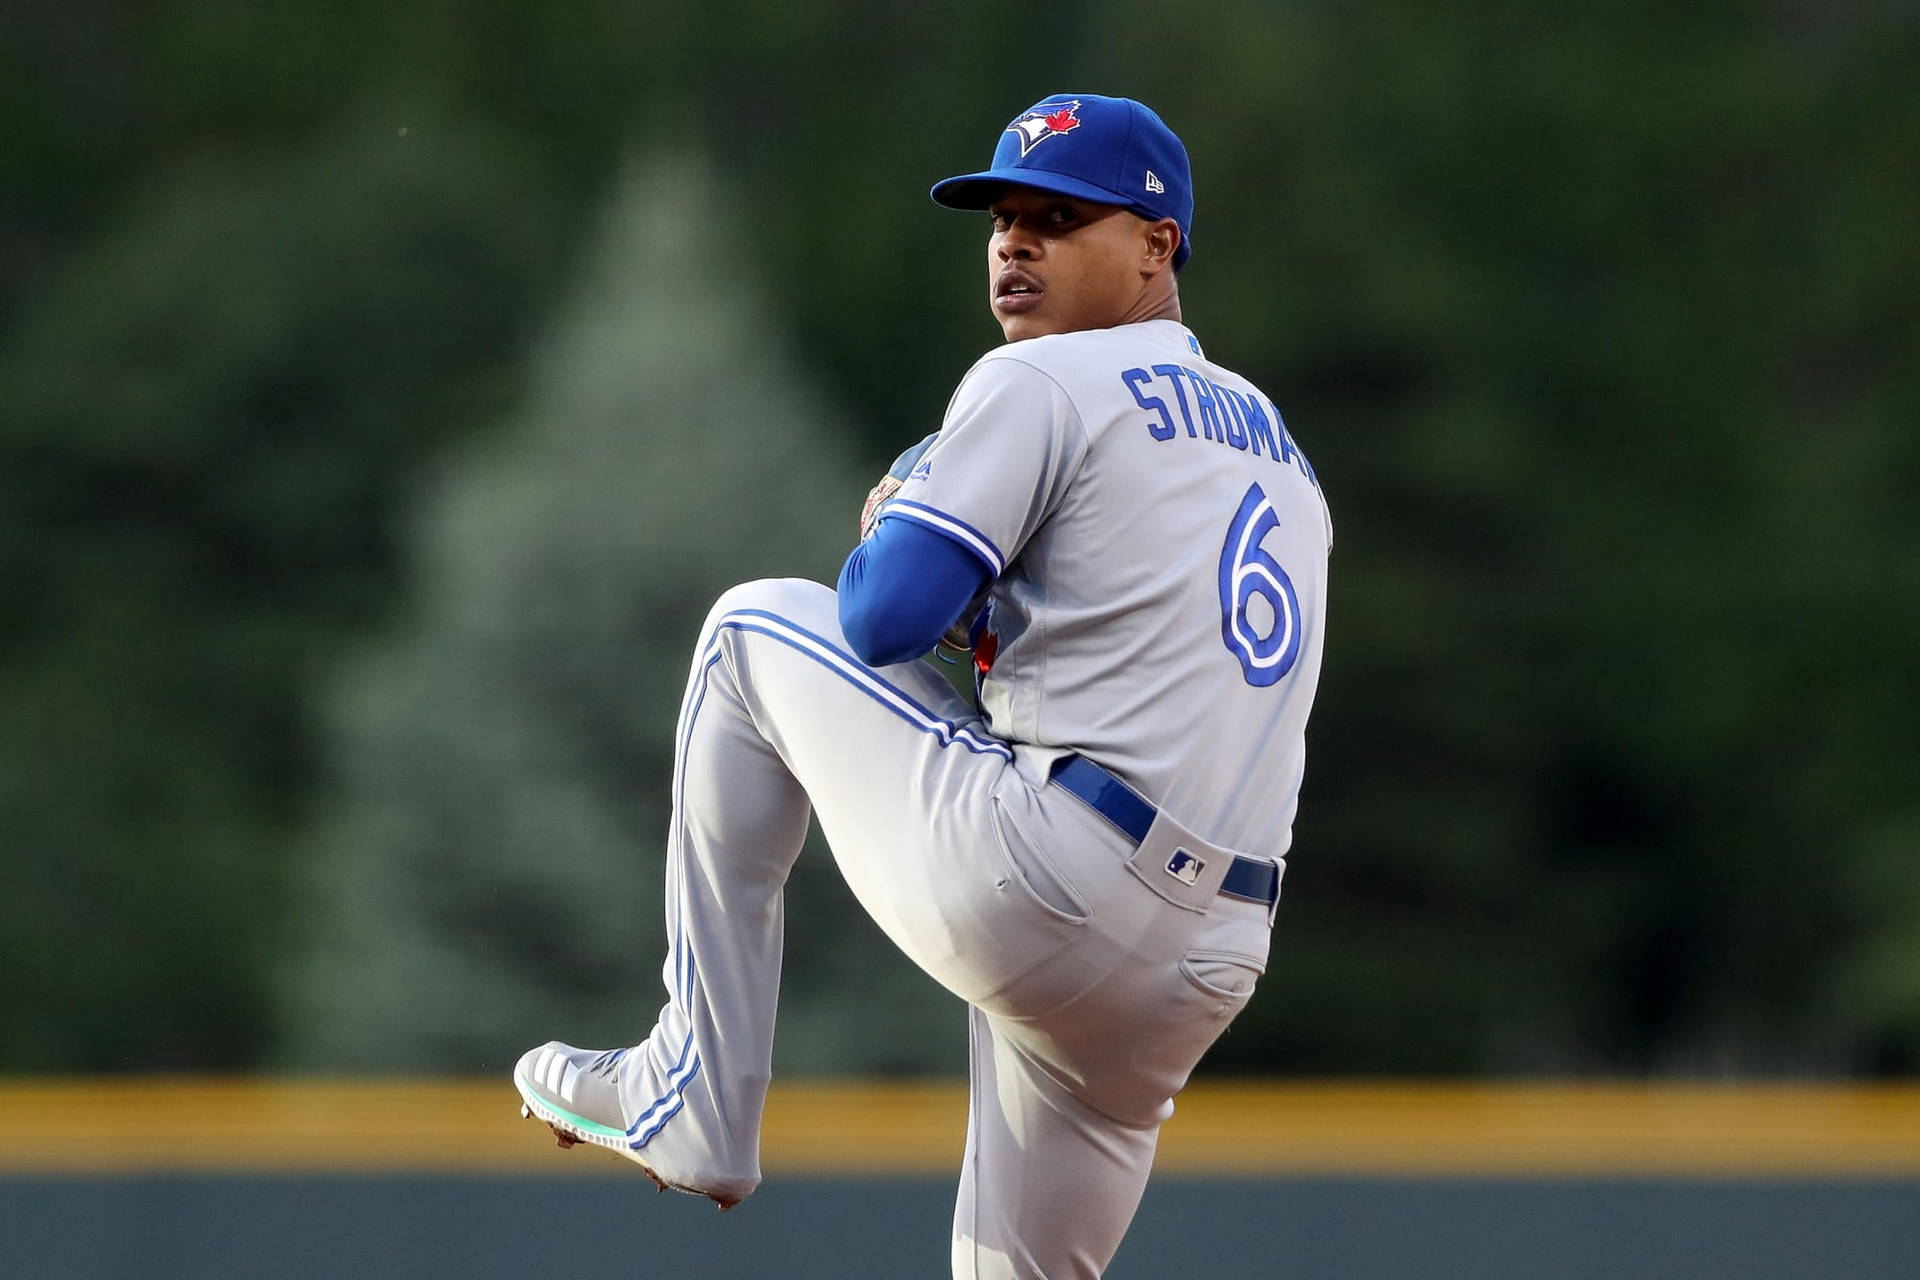 Marcus Stroman of the Toronto Blue Jays poses for a photo during the